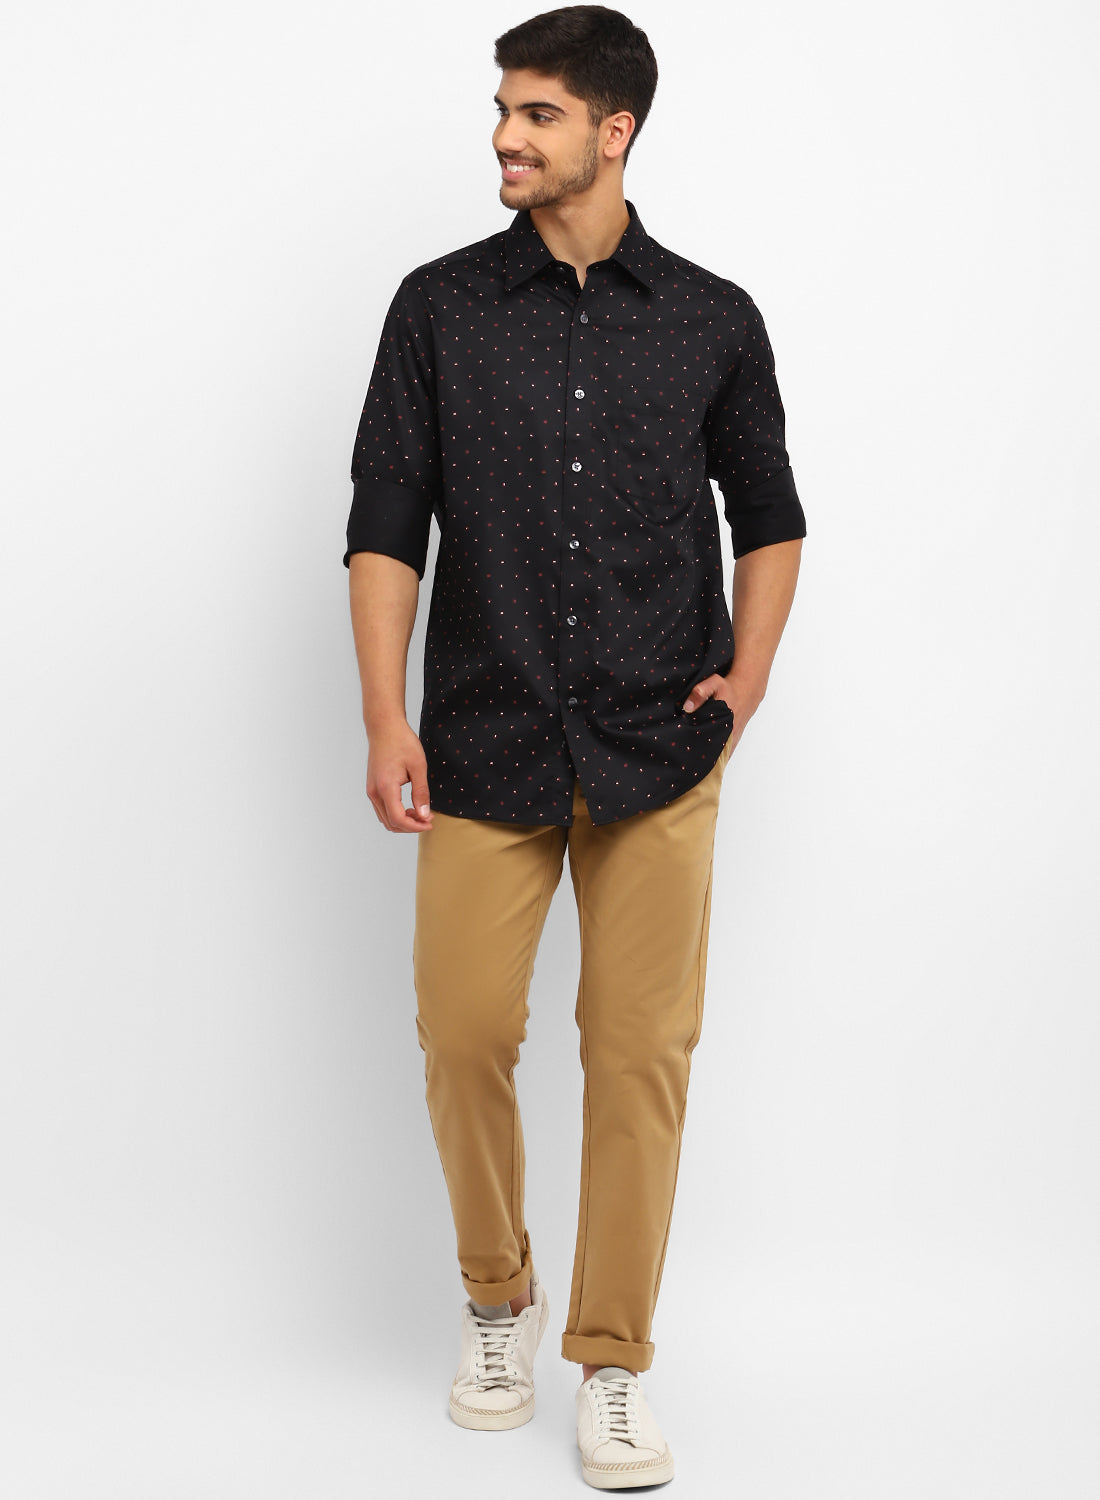 Black & Red Cotton Printed Casual Shirt